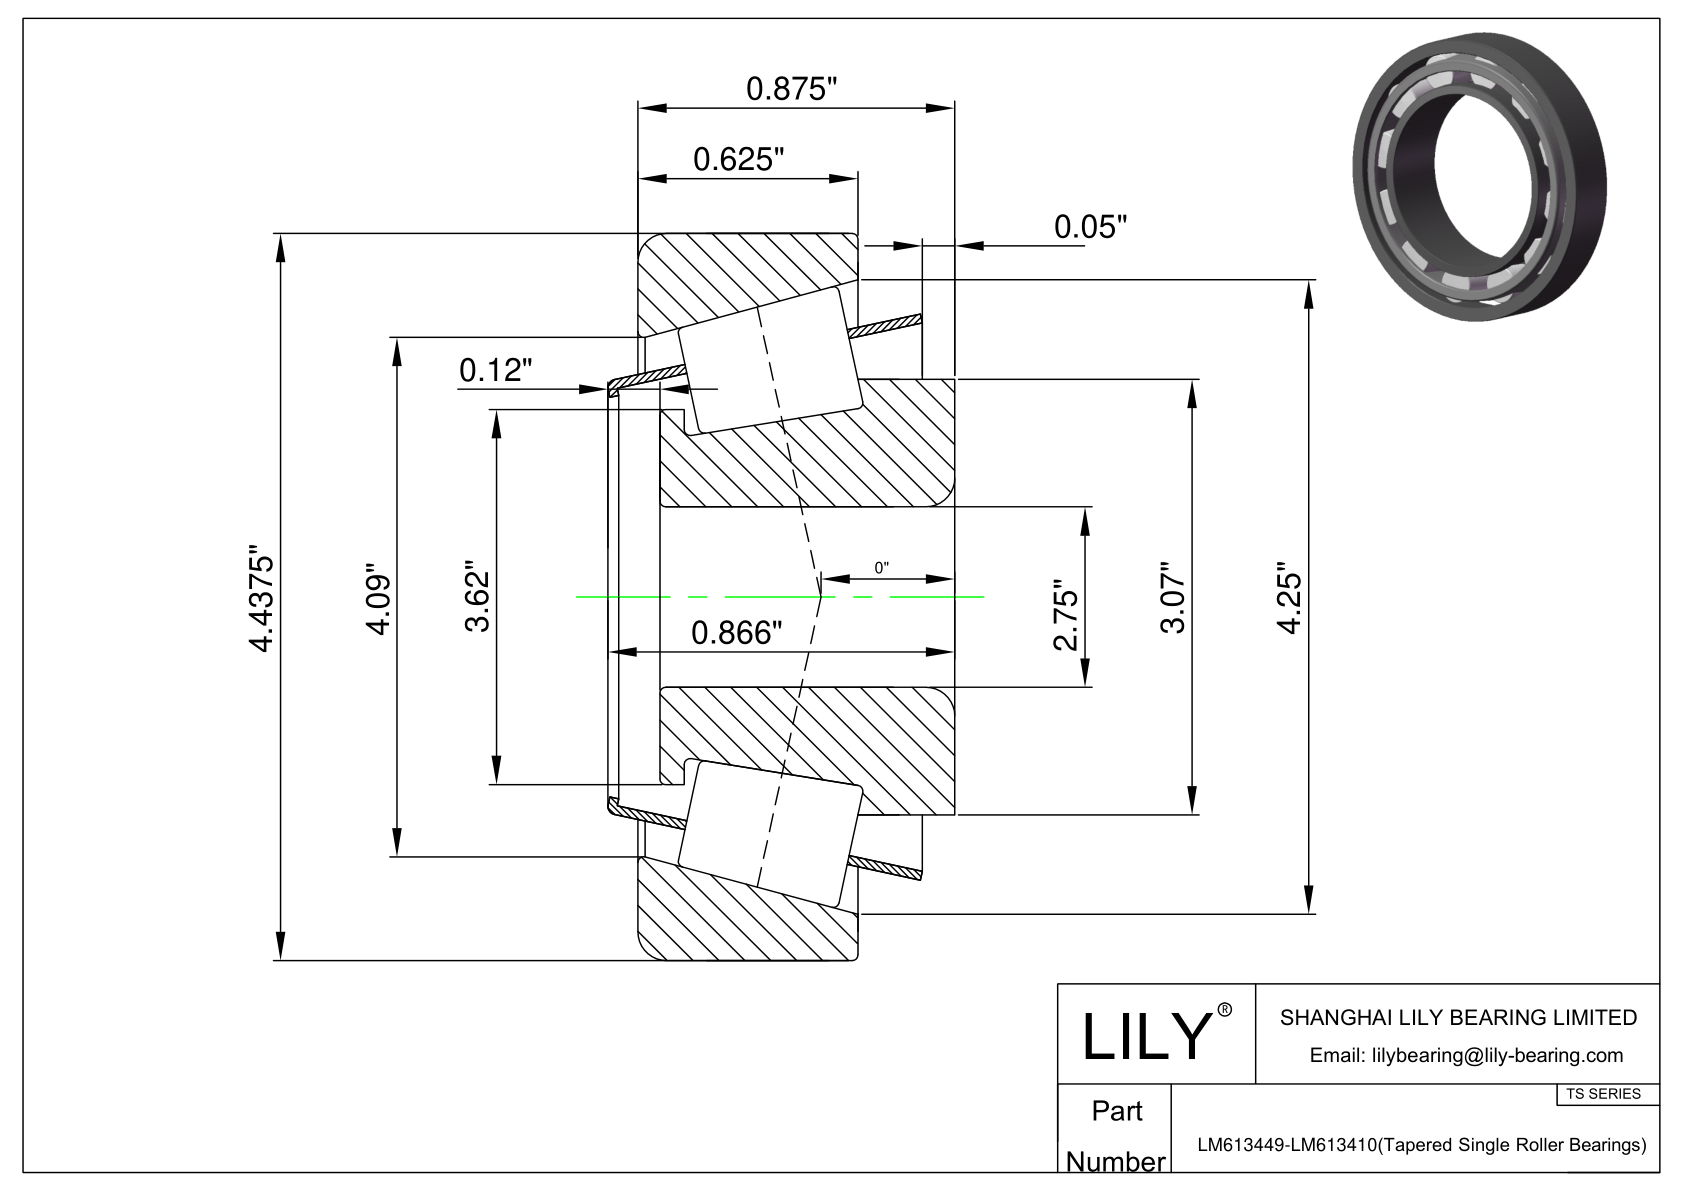 LM613449-LM613410 TS (Tapered Single Roller Bearings) (Imperial) cad drawing